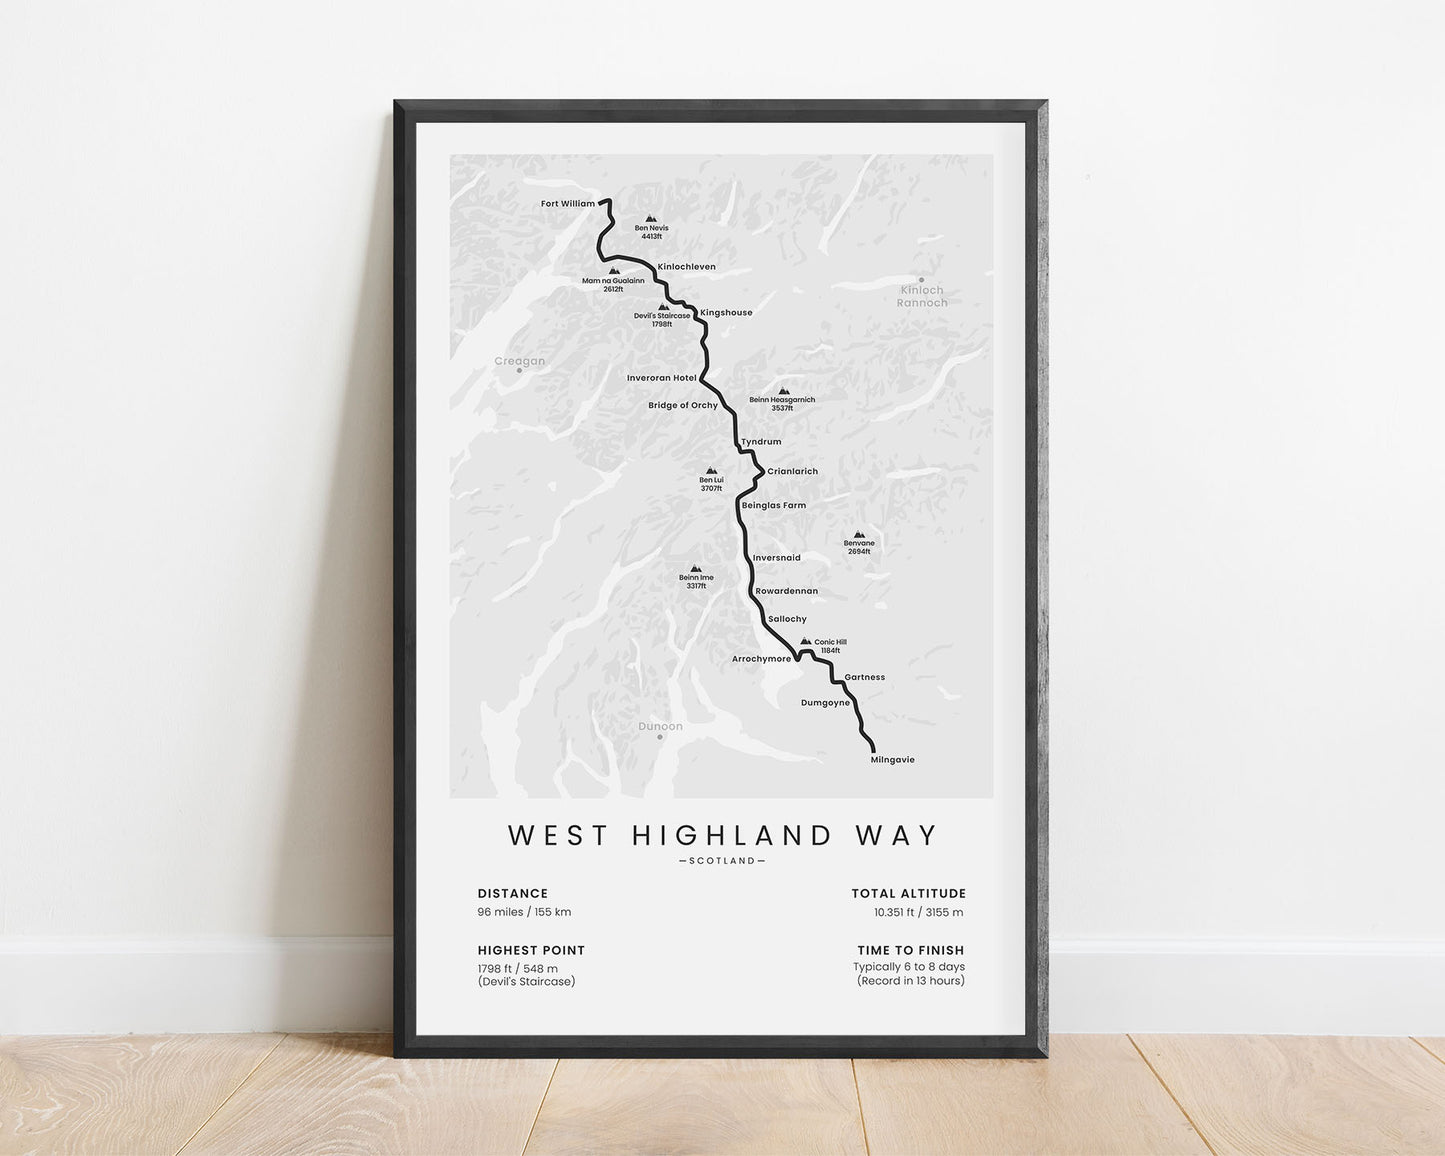 West Highland Way in Scotland Hiking Trail map with white background